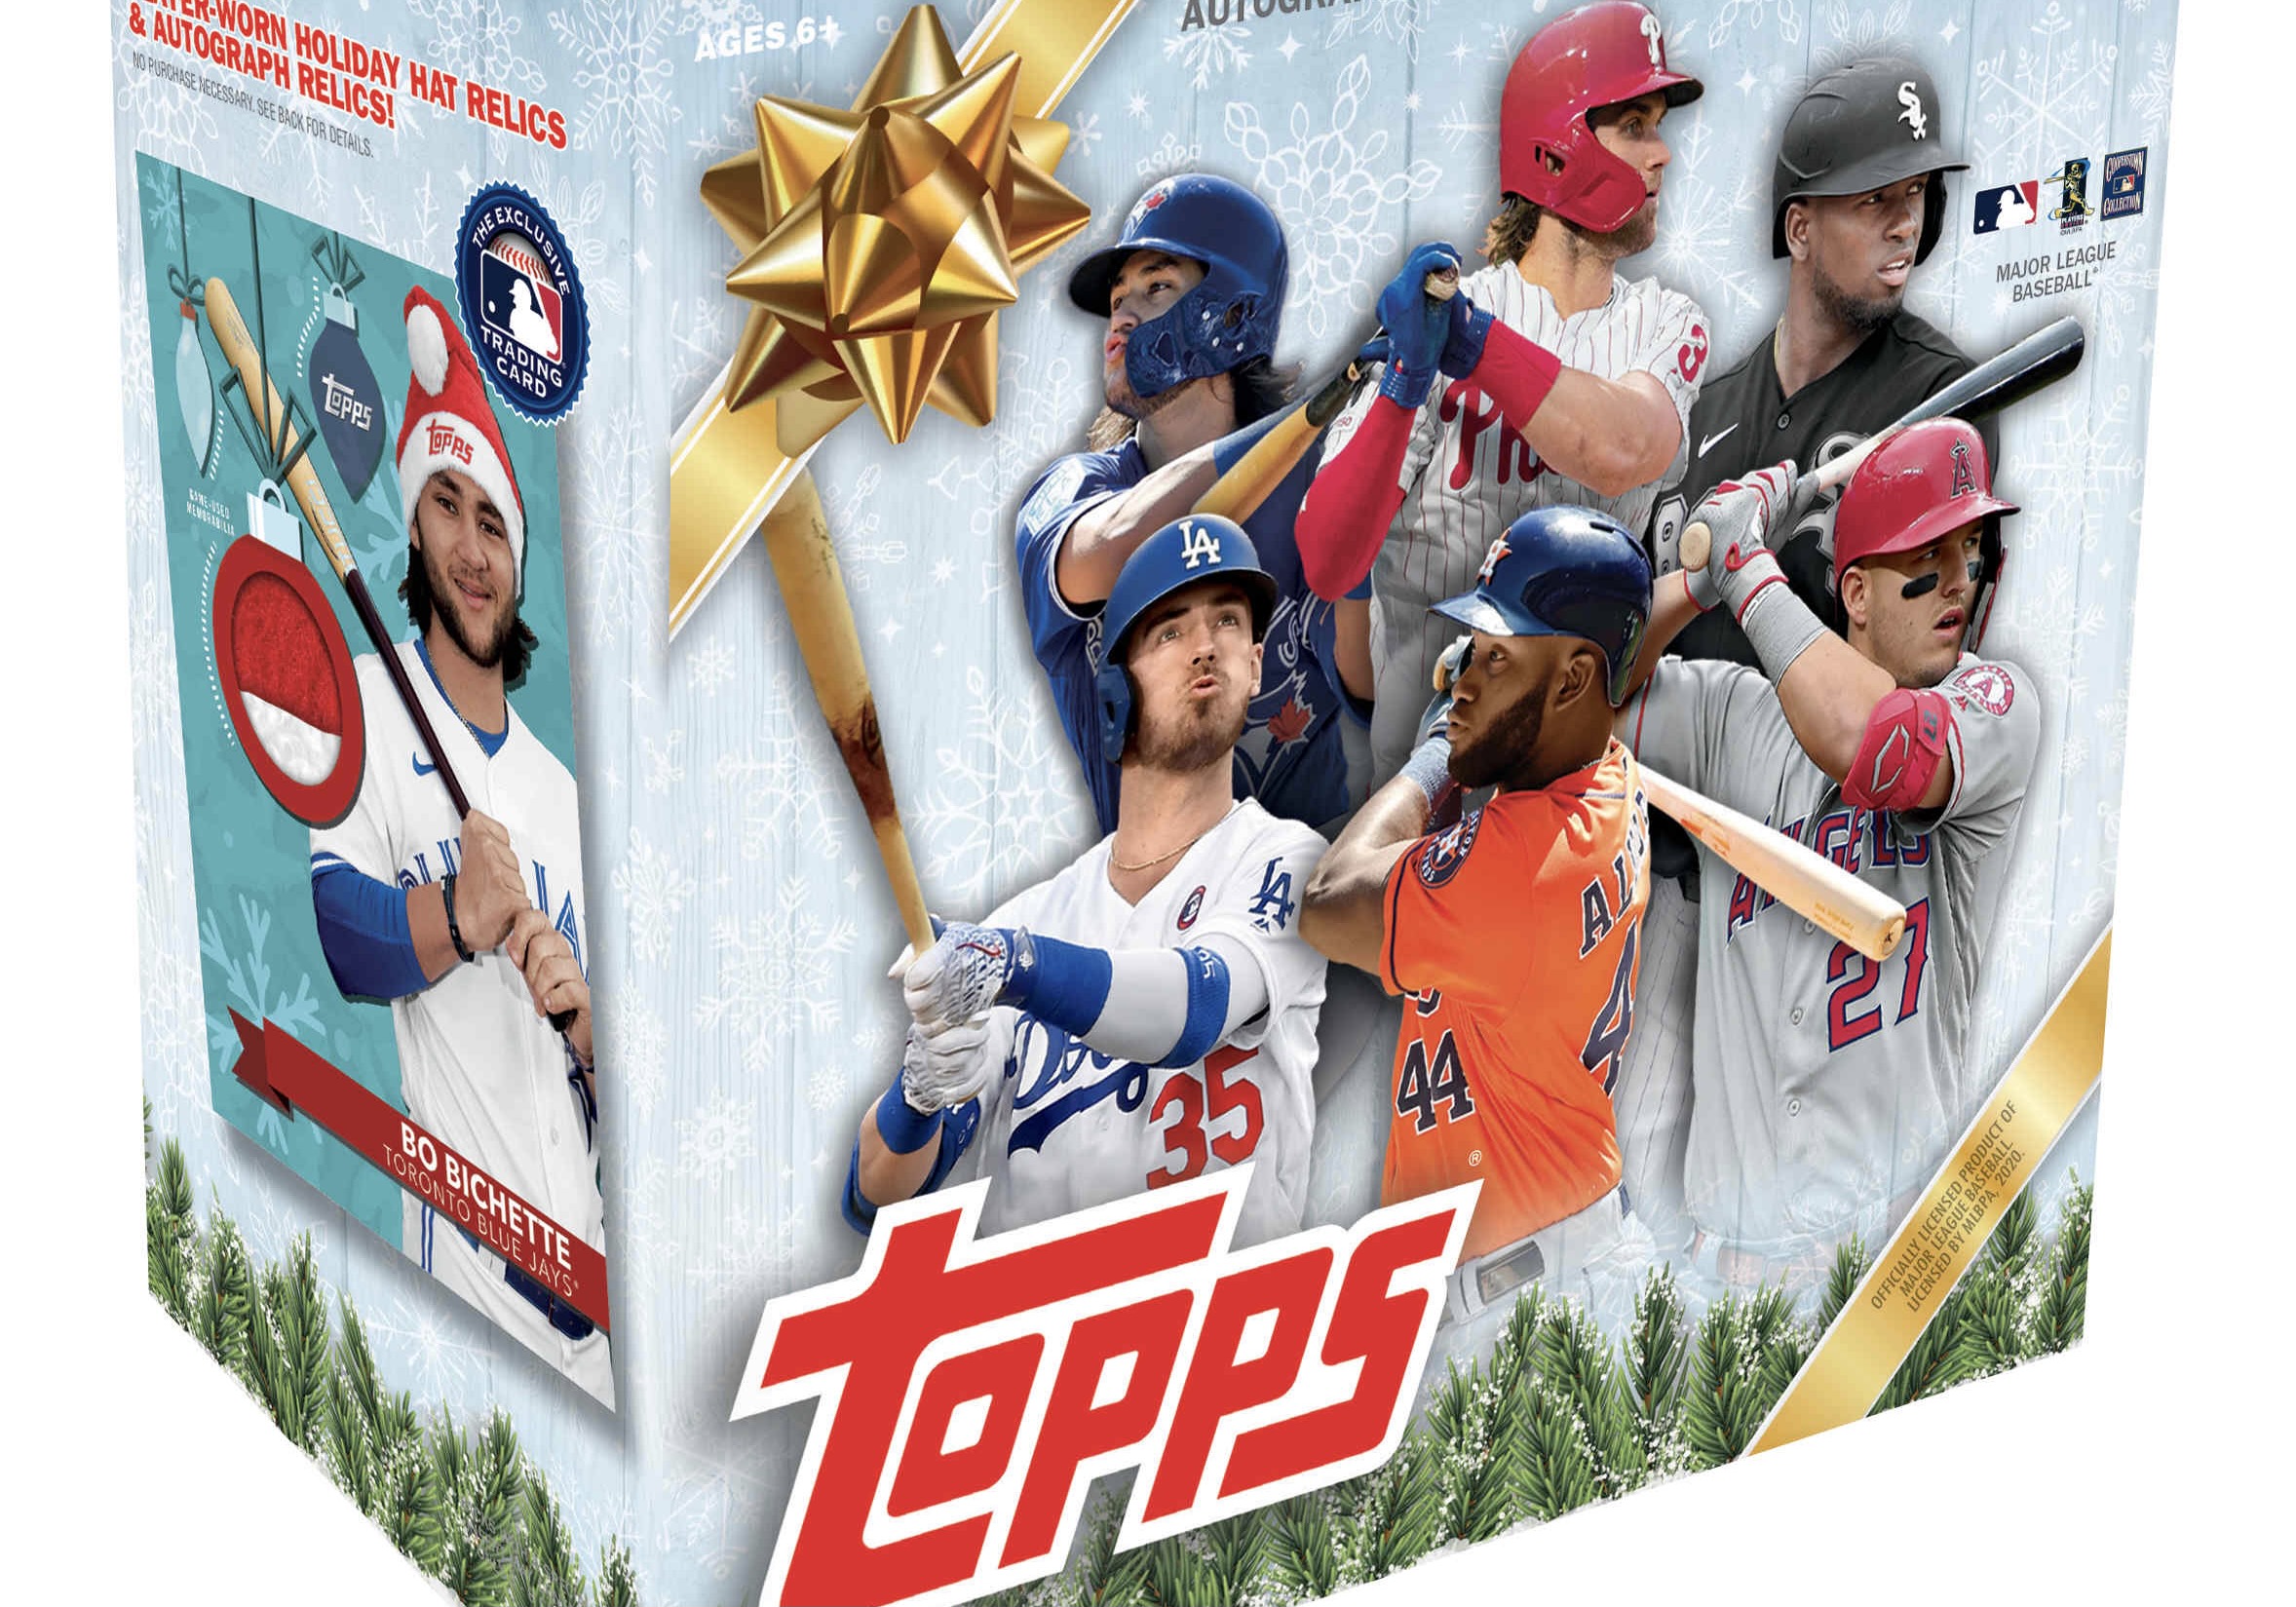 Topps Loses MLB License To Fanatics The Licensing Letter